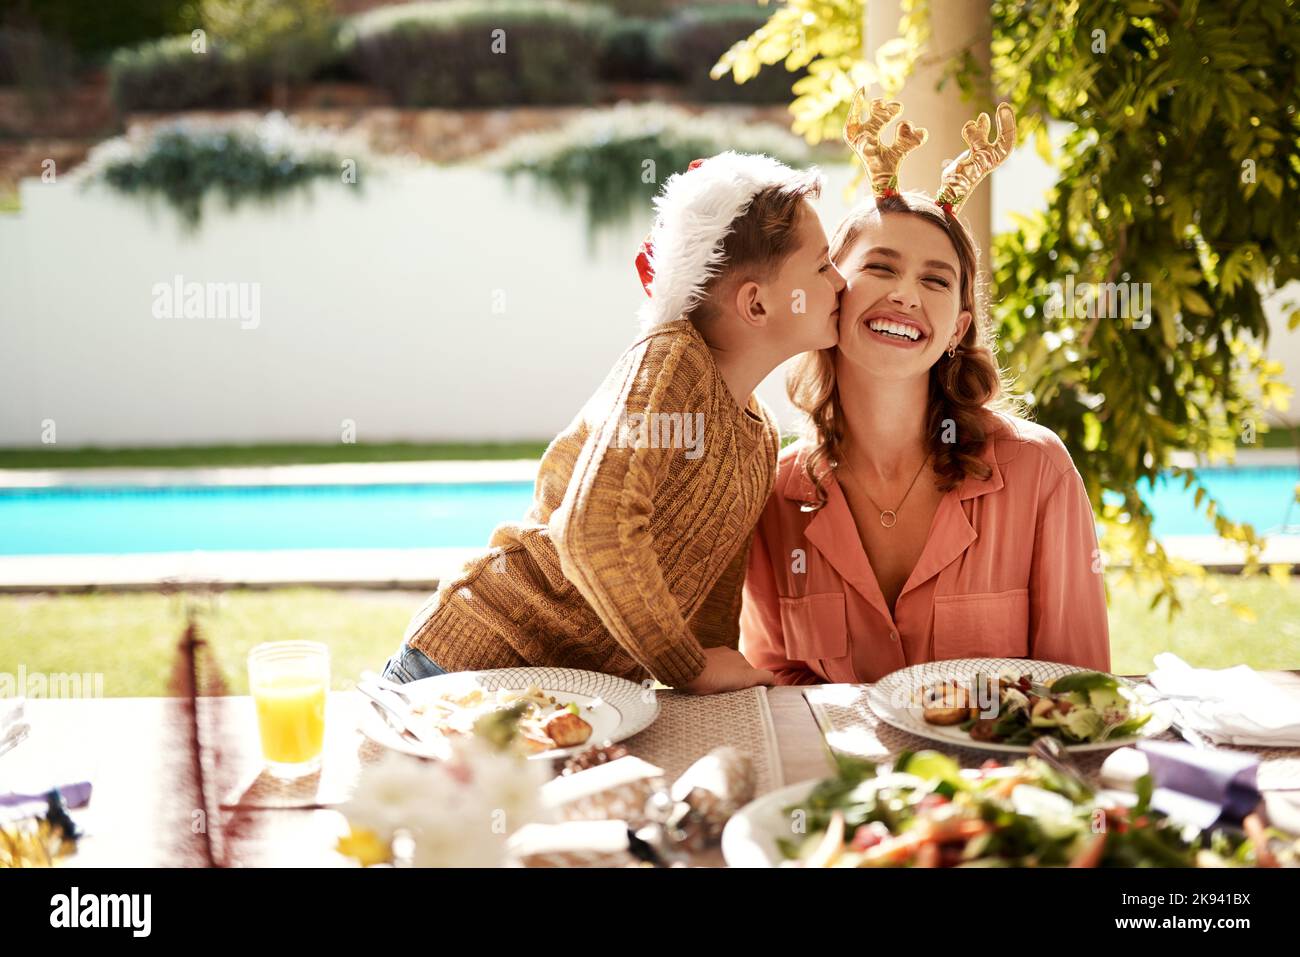 Love from family is all you need on Christmas. a girl girl and her mother enjoying Christmas lunch together. Stock Photo